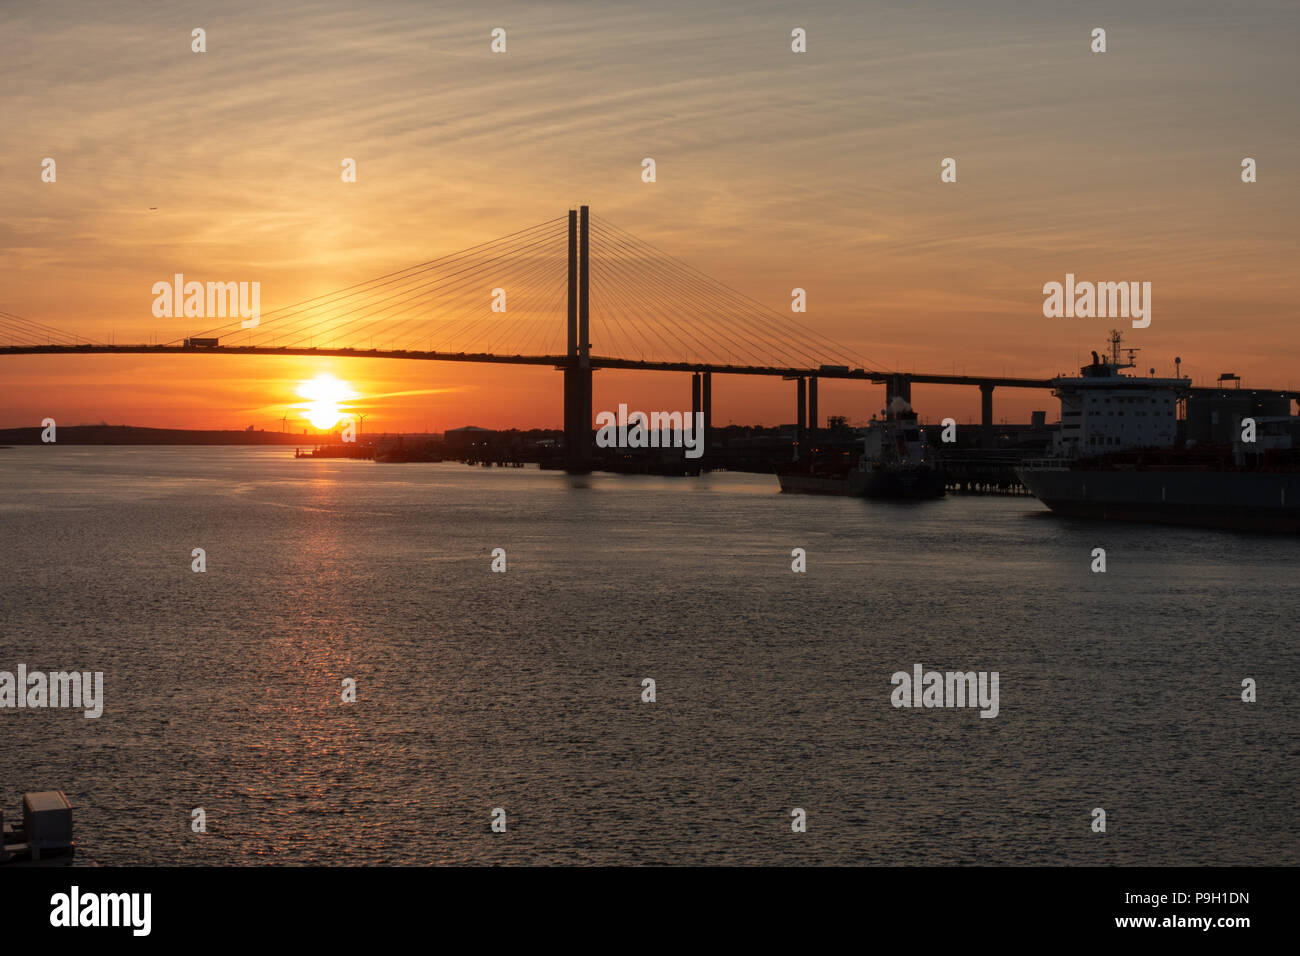 Queen Elizabeth II bridge over the Thames River in London with a sunset Stock Photo